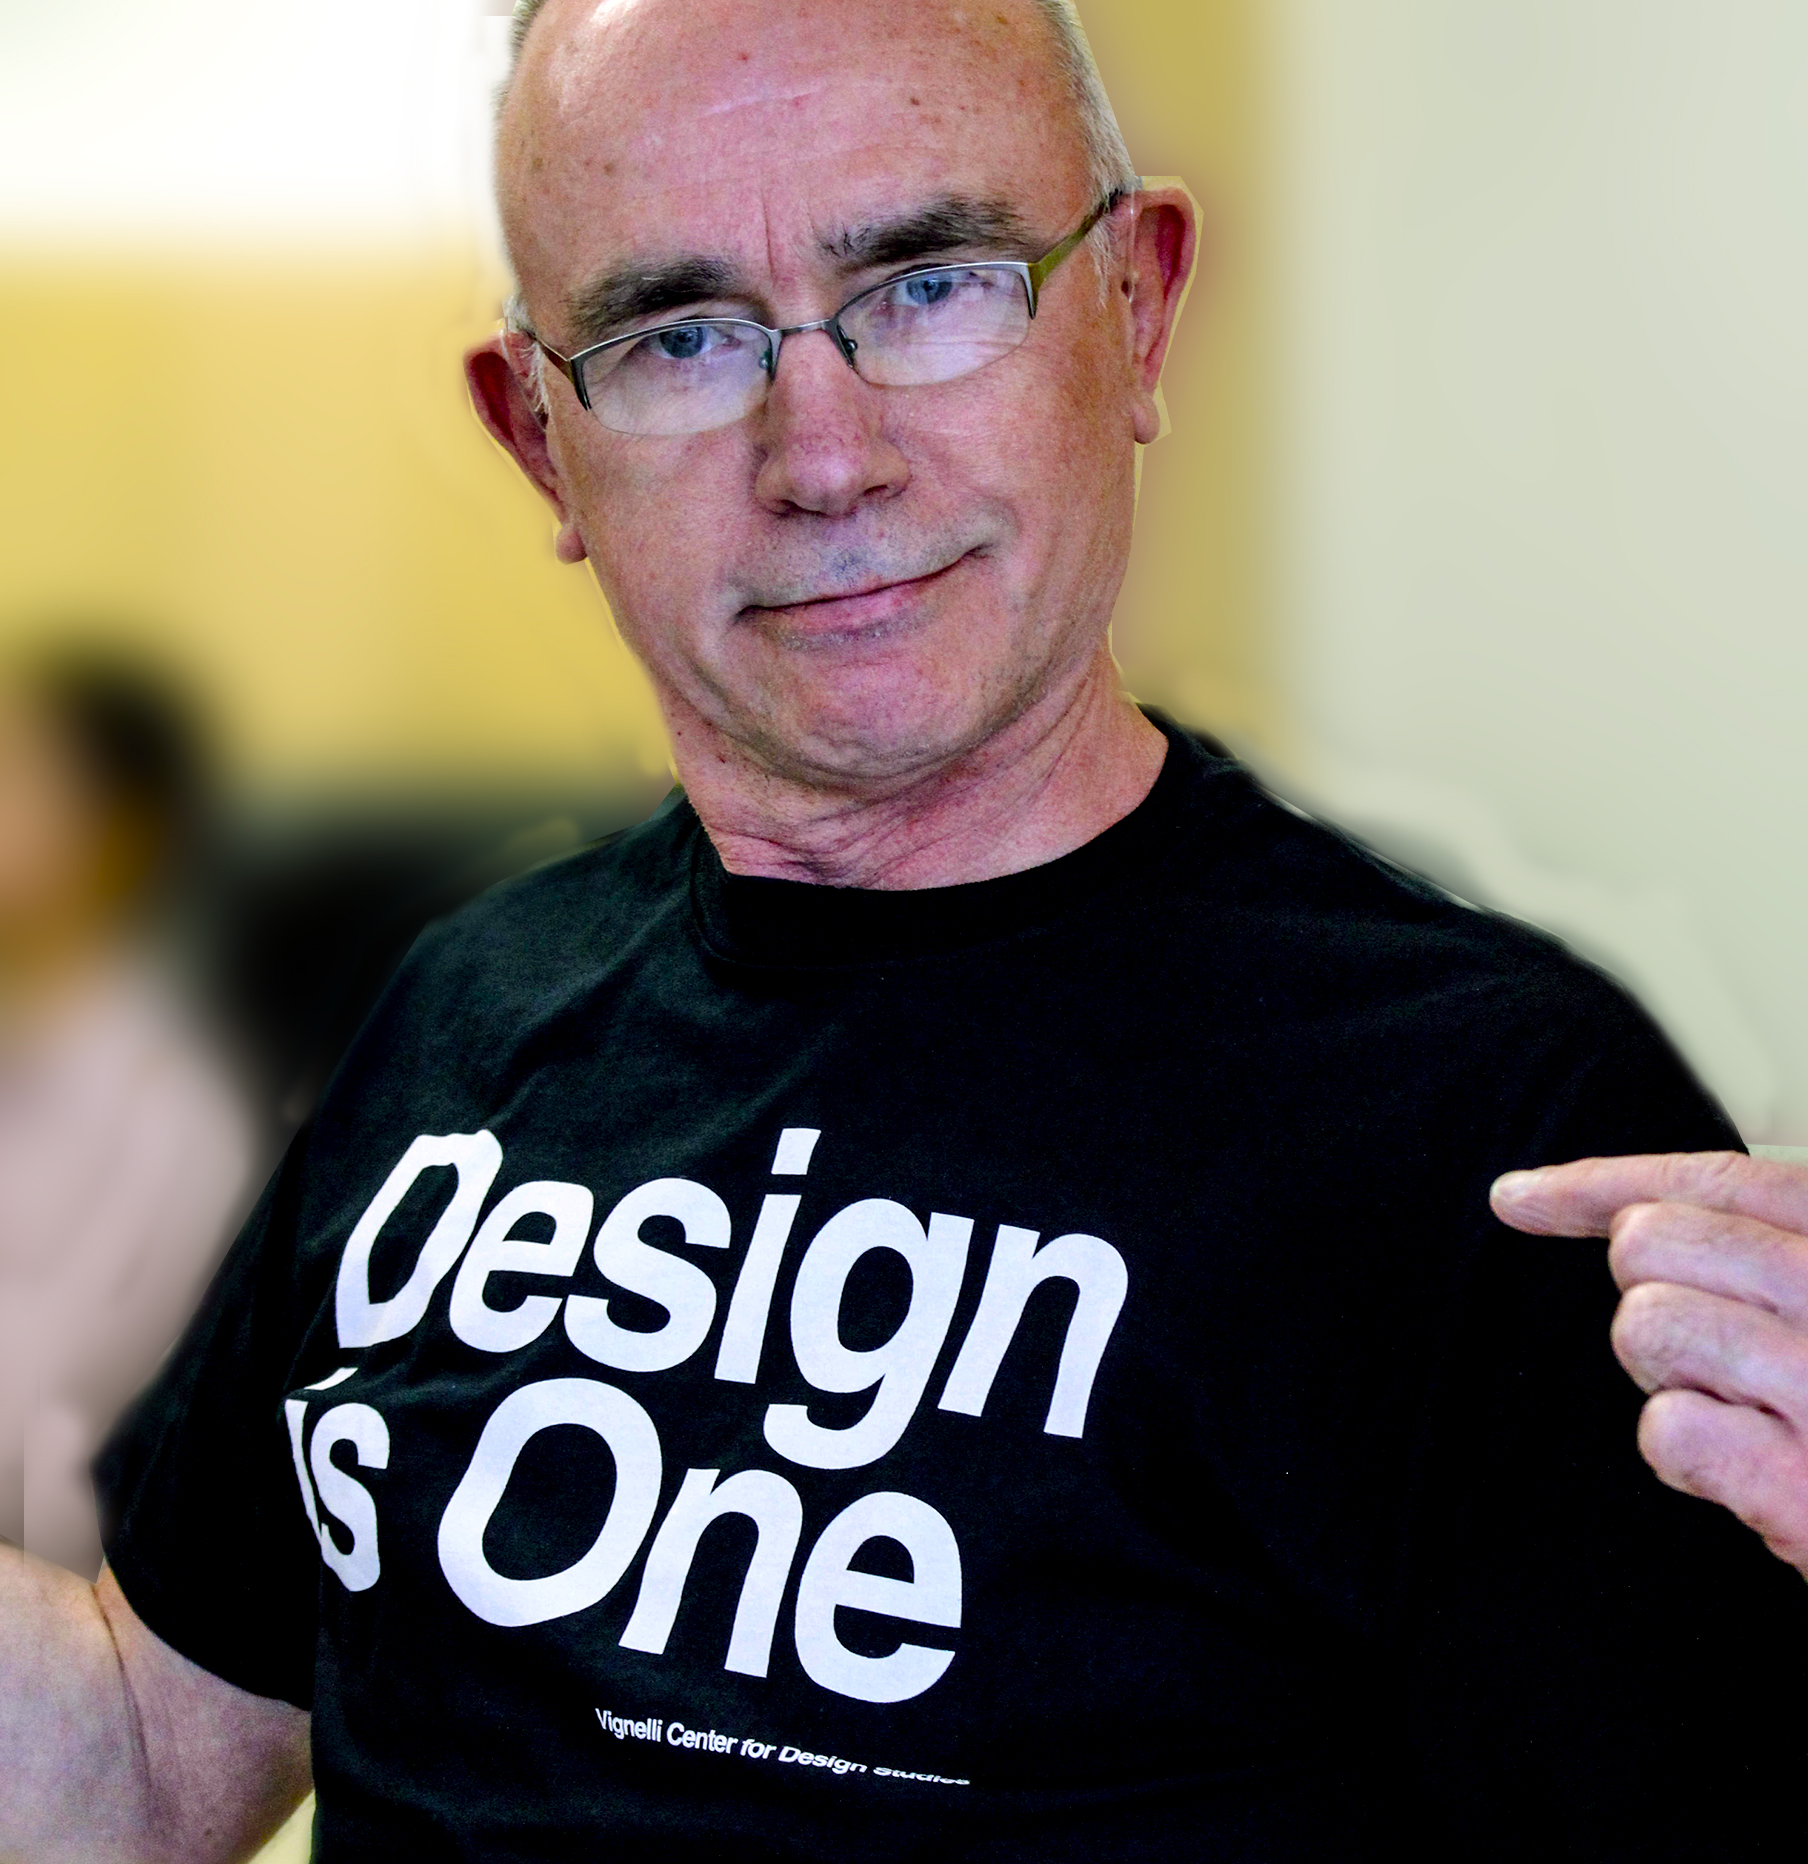 A photo of Stephen Scherer wearing a shirt that says Design is One.